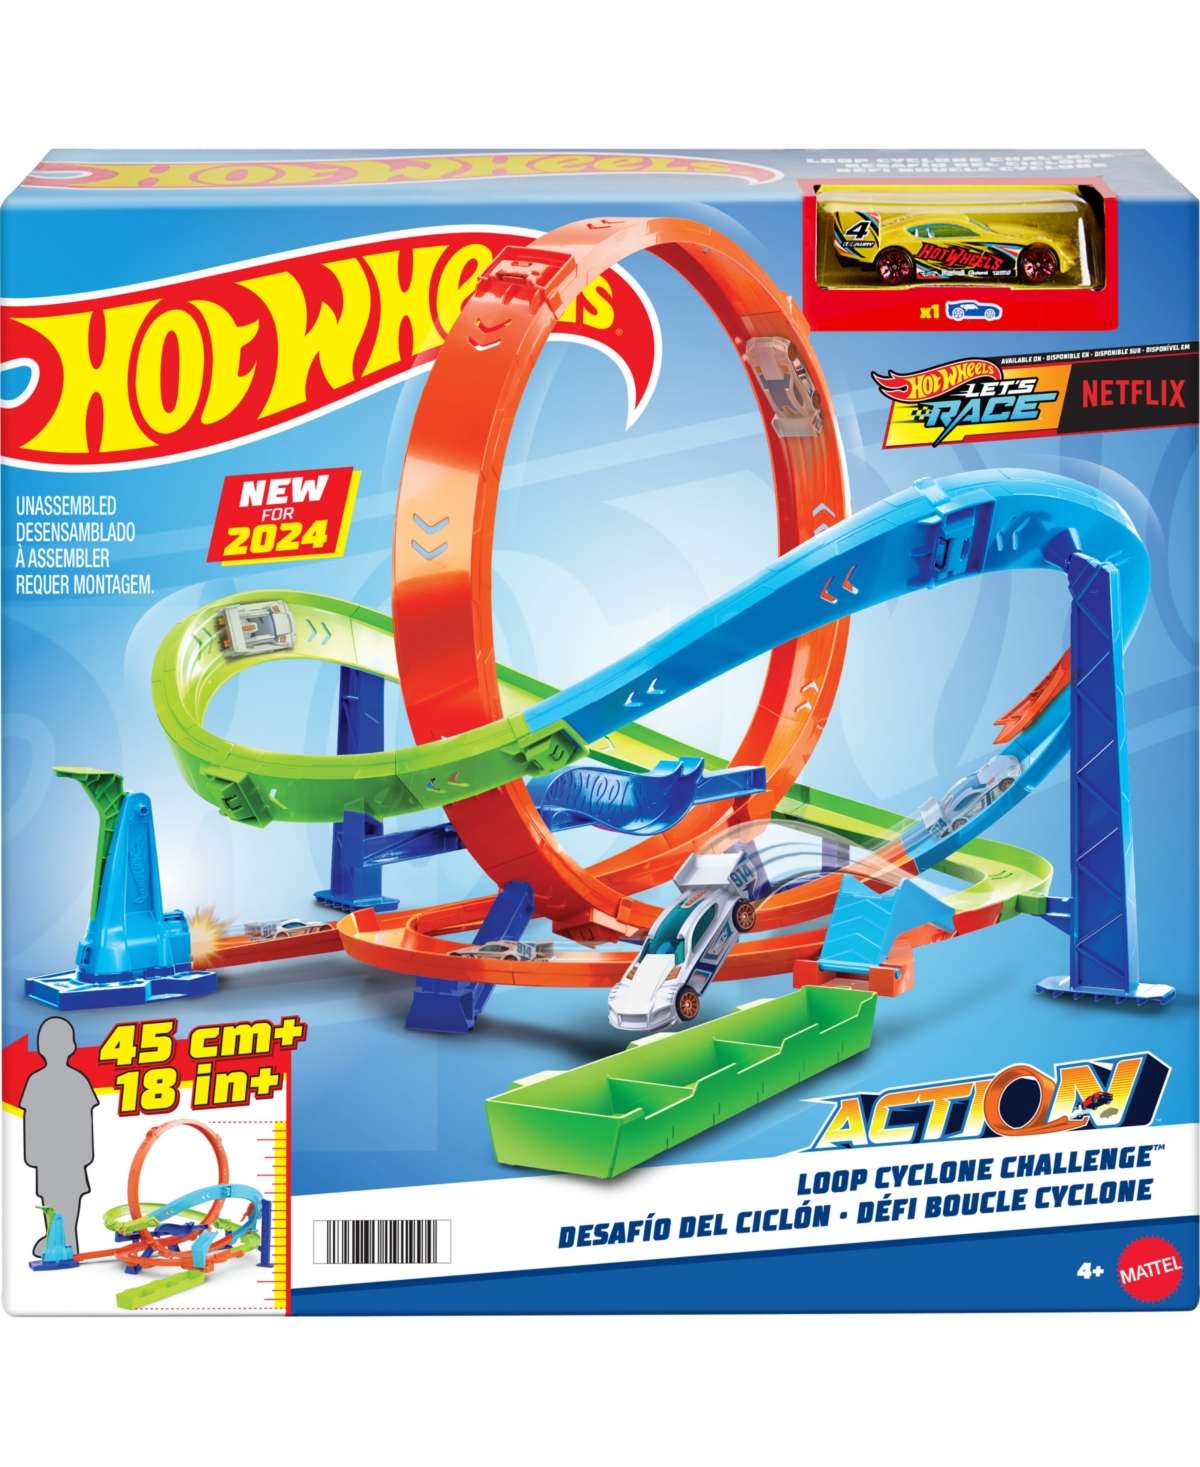 Shop Hot Wheels Action Loop Cyclone Challenge Track Set With 1:64 Scale Toy Car, Easy Storage In No Color